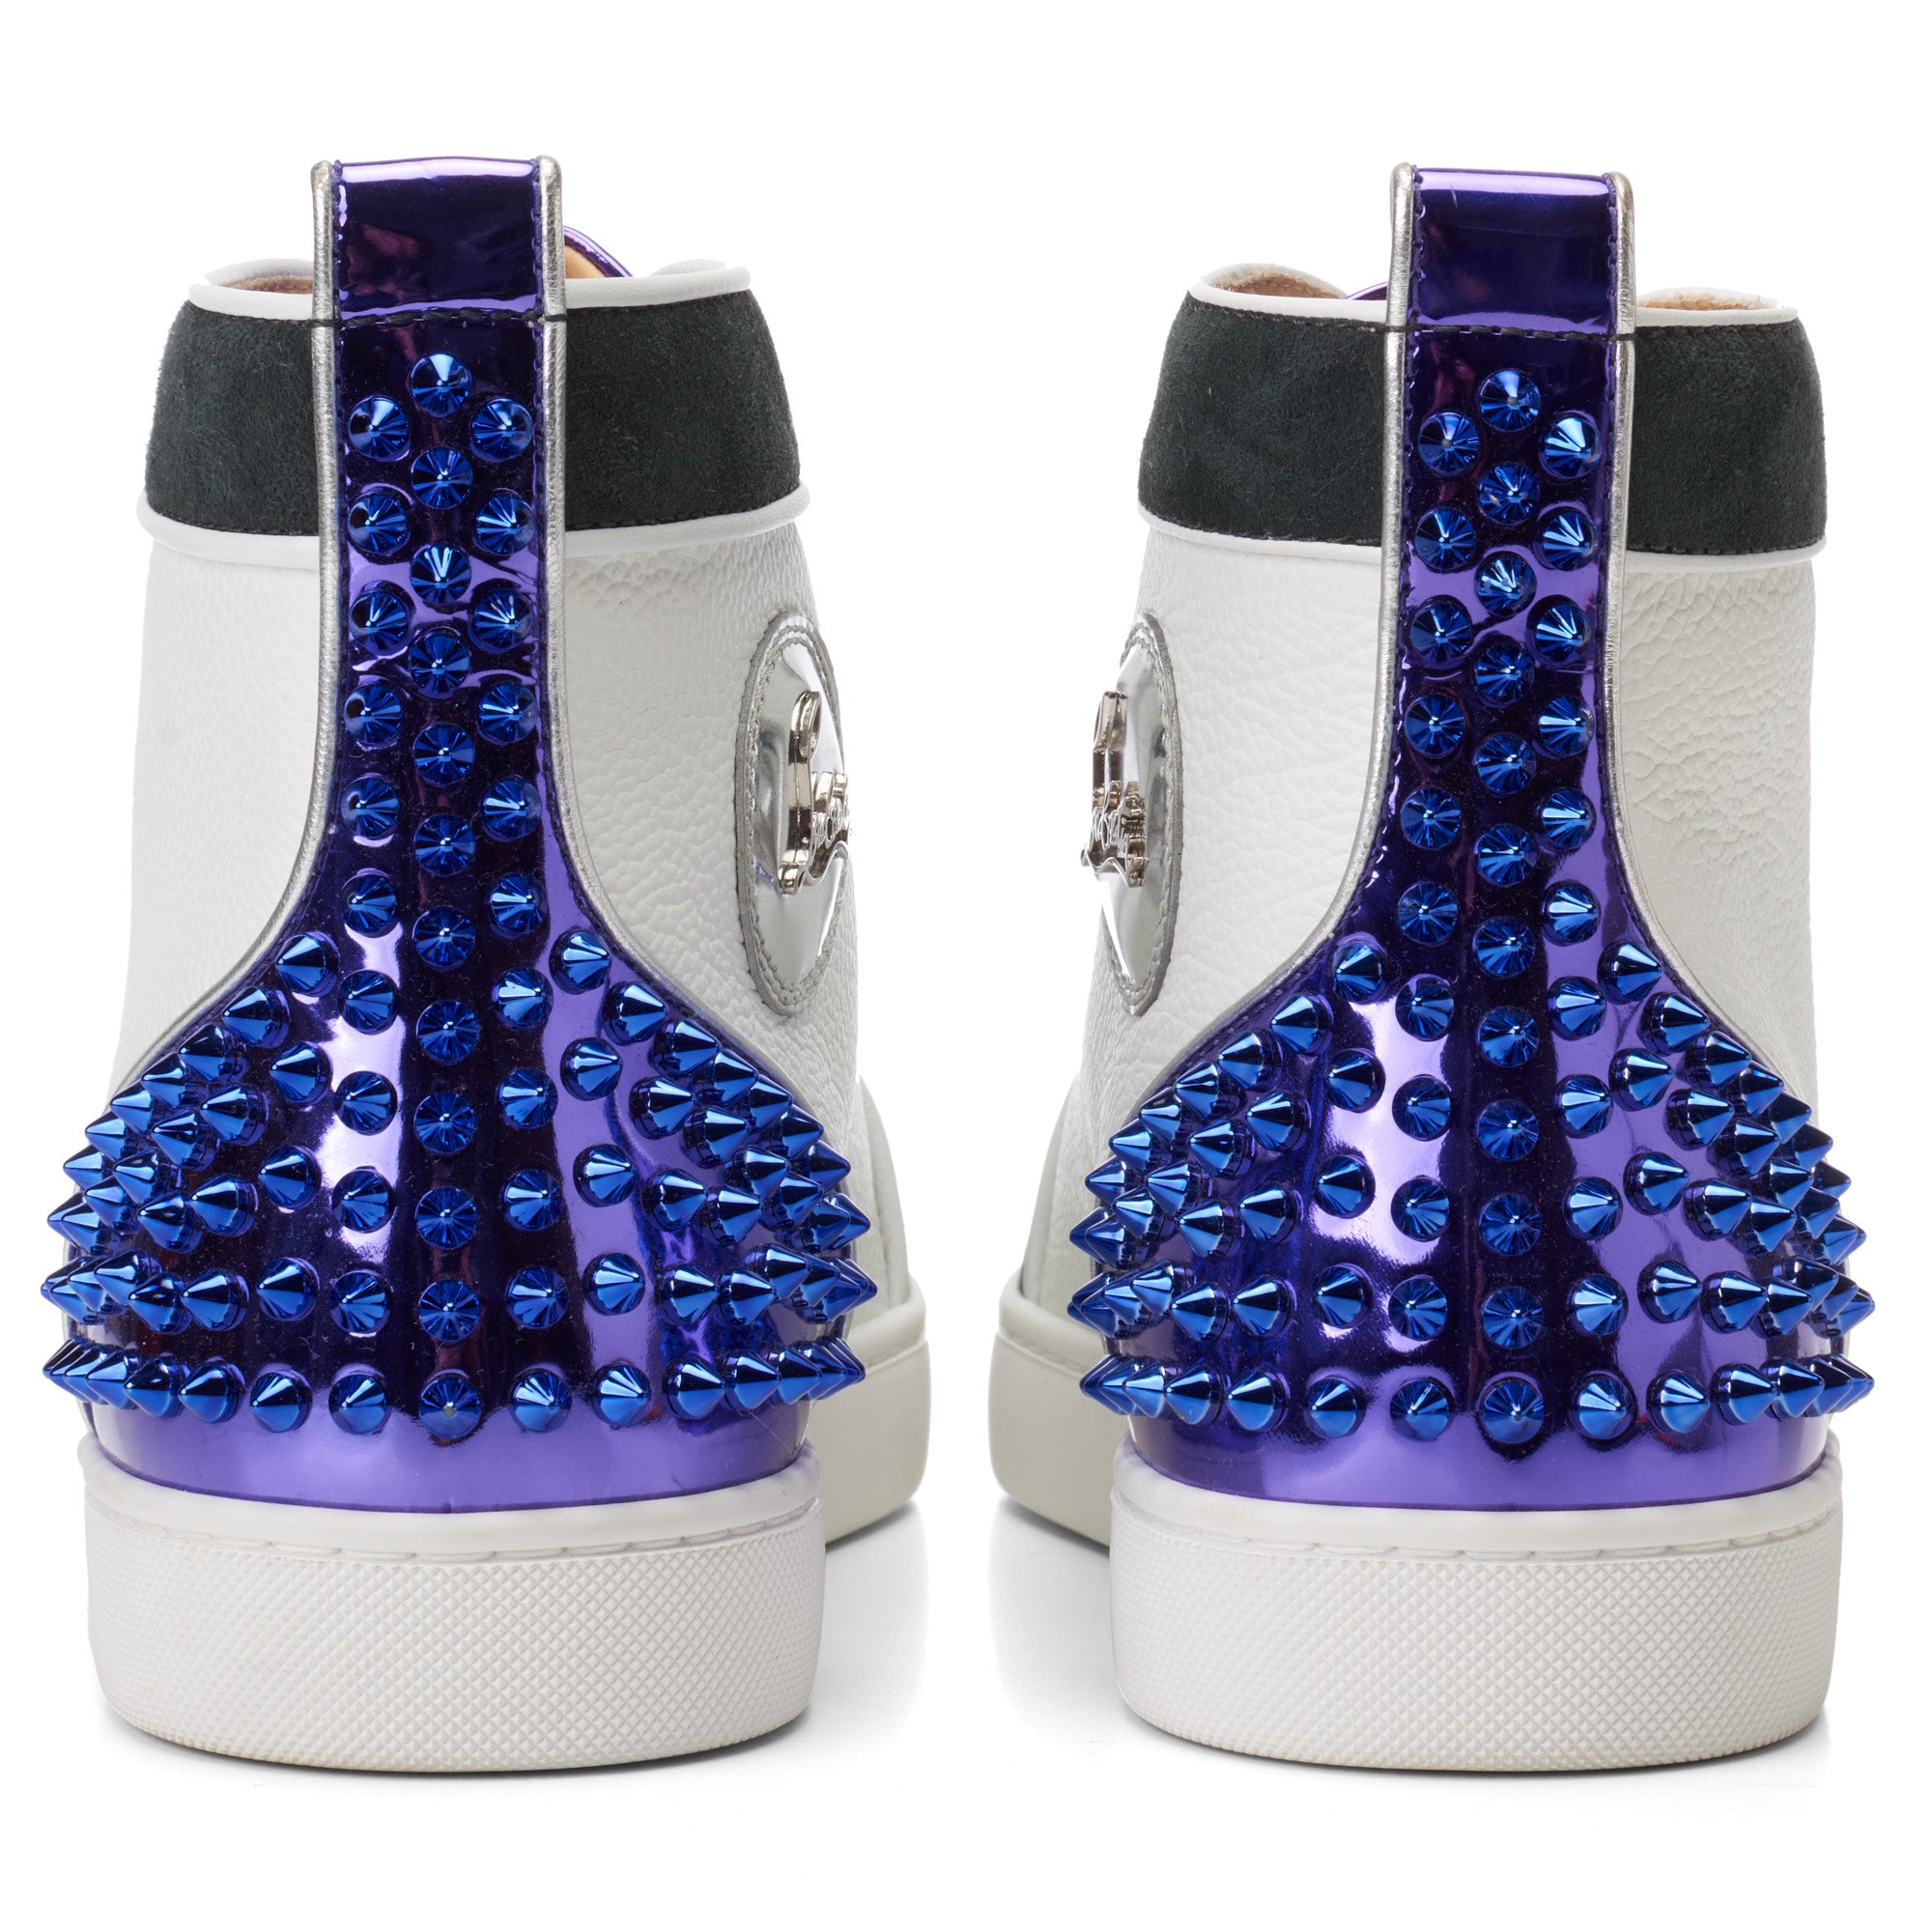 CHRISTIAN LOUBOUTIN WOMEN'S CRAZY SPIKED HIGH TOP SNEAKERS-SIZE 7